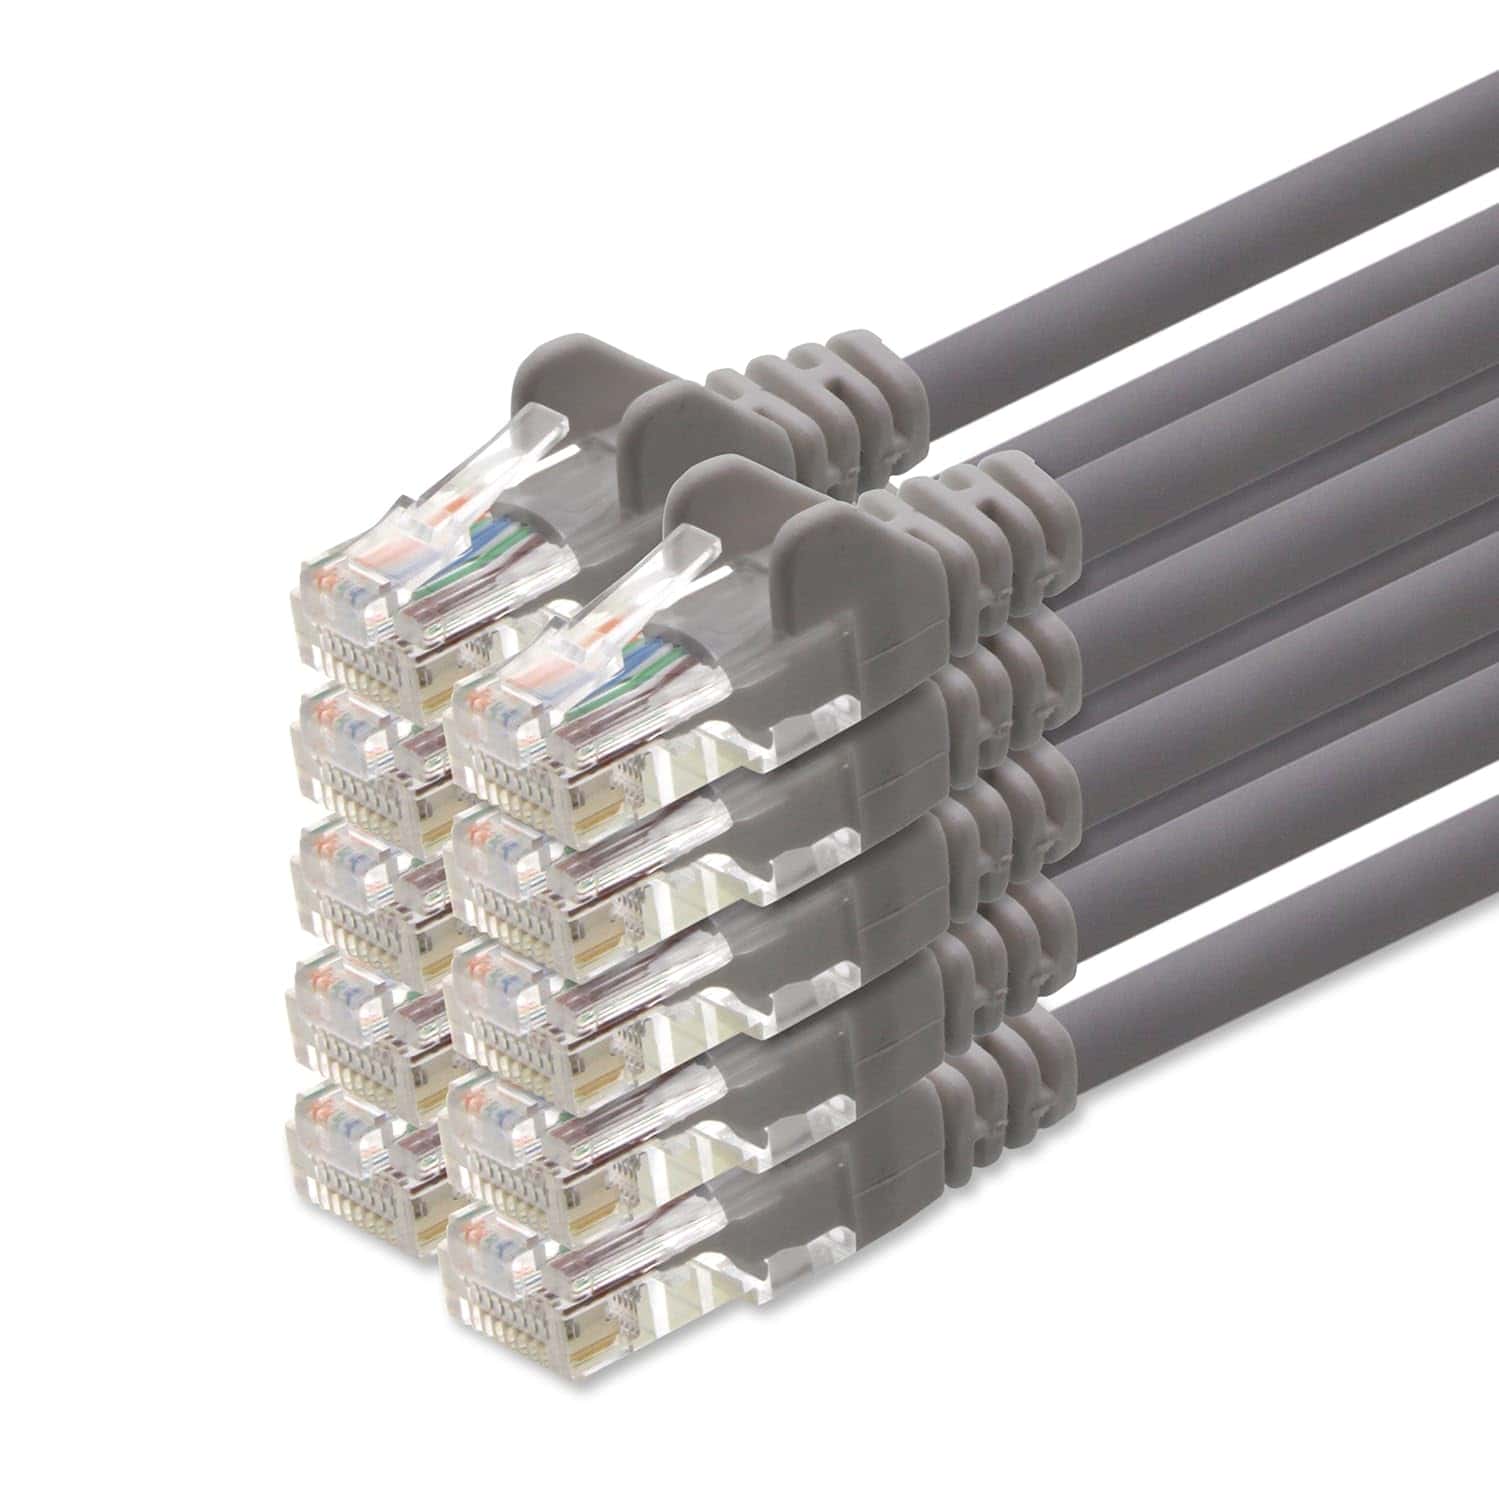 A pack of Cat 5E Ethernet cables on a white background.